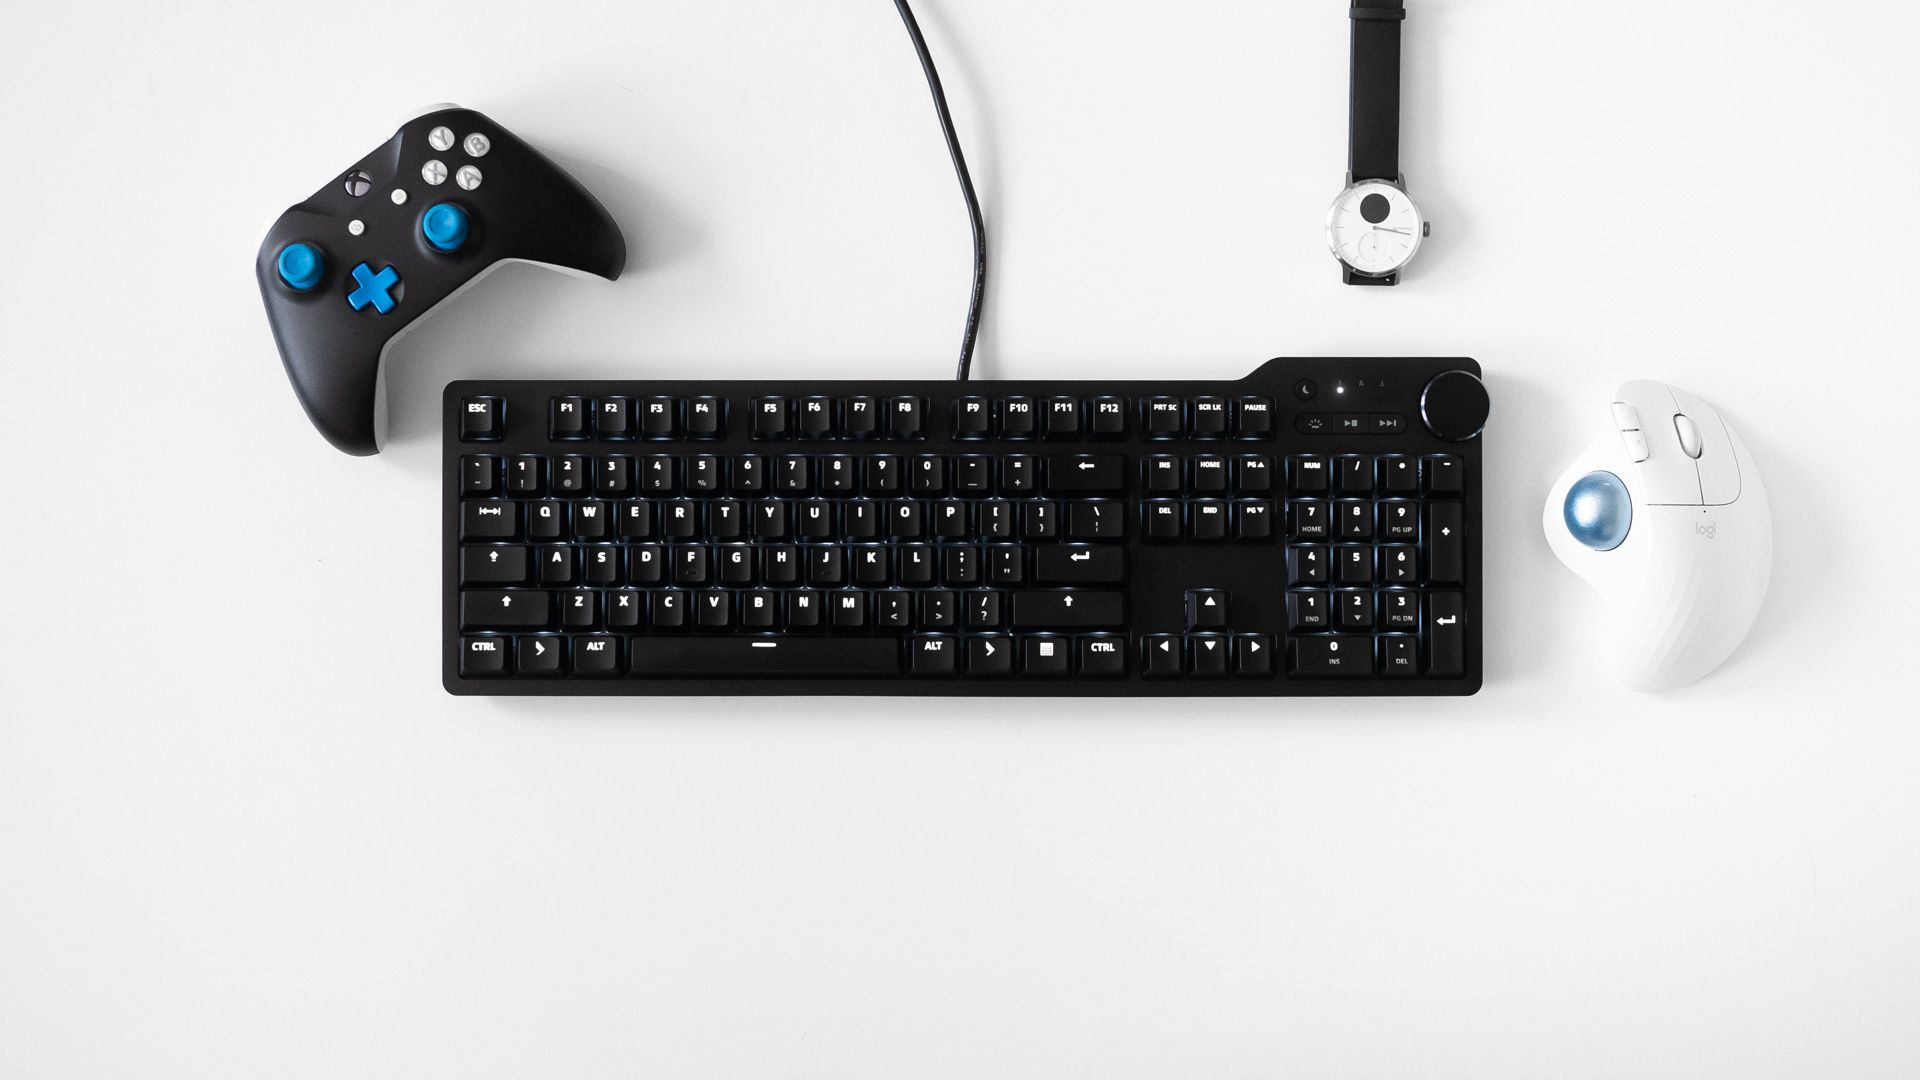 Das Keyboard 6 Professional with an xbox controller, watch, and trackball mouse surrounding it